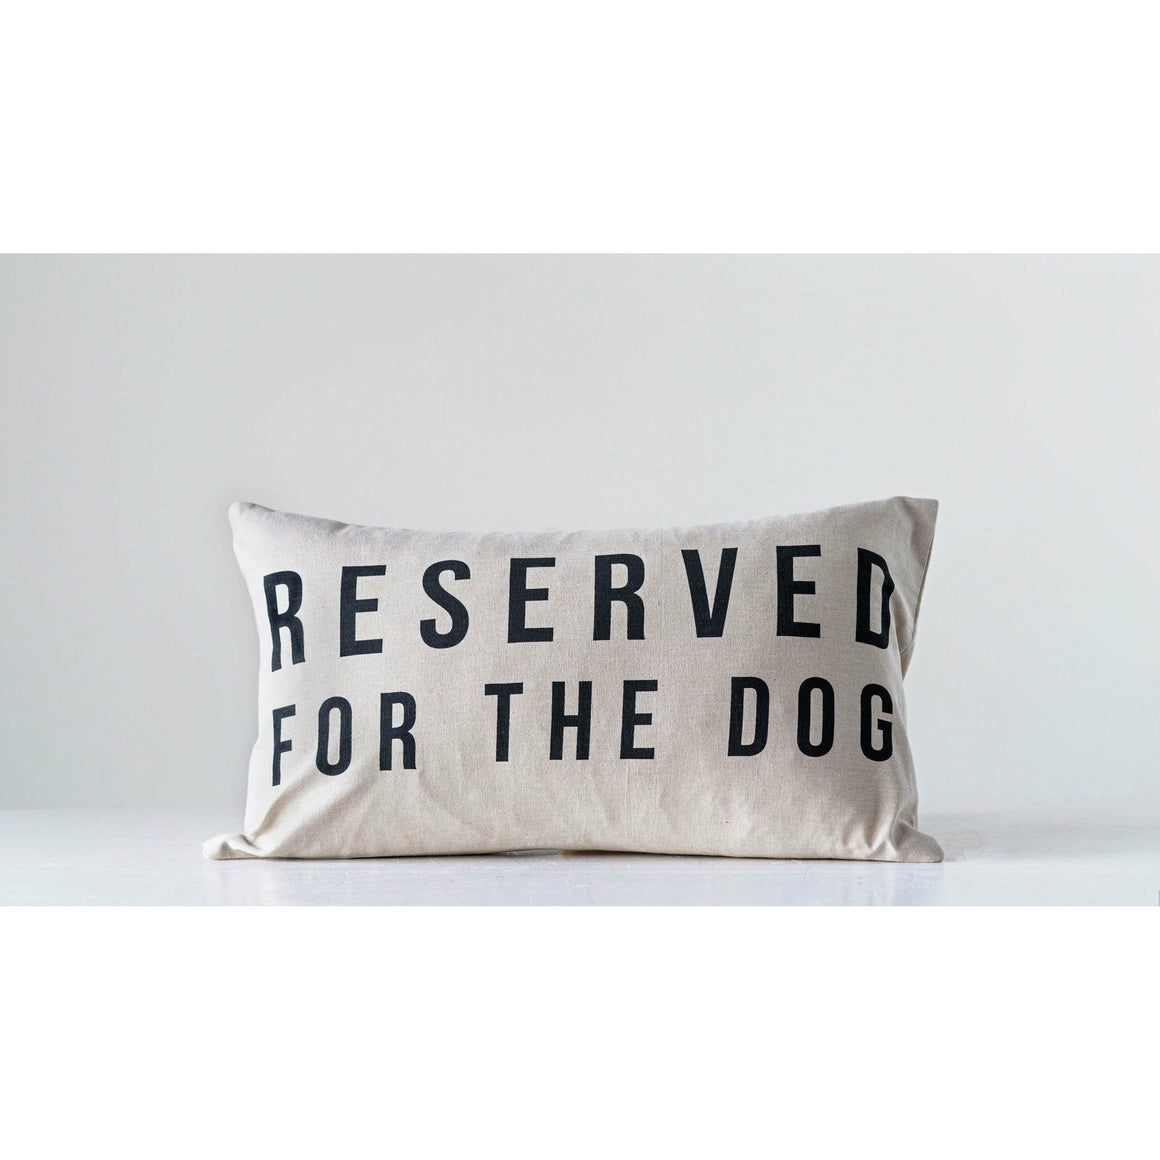 "Reserved for the Dog" Cotton Pillow